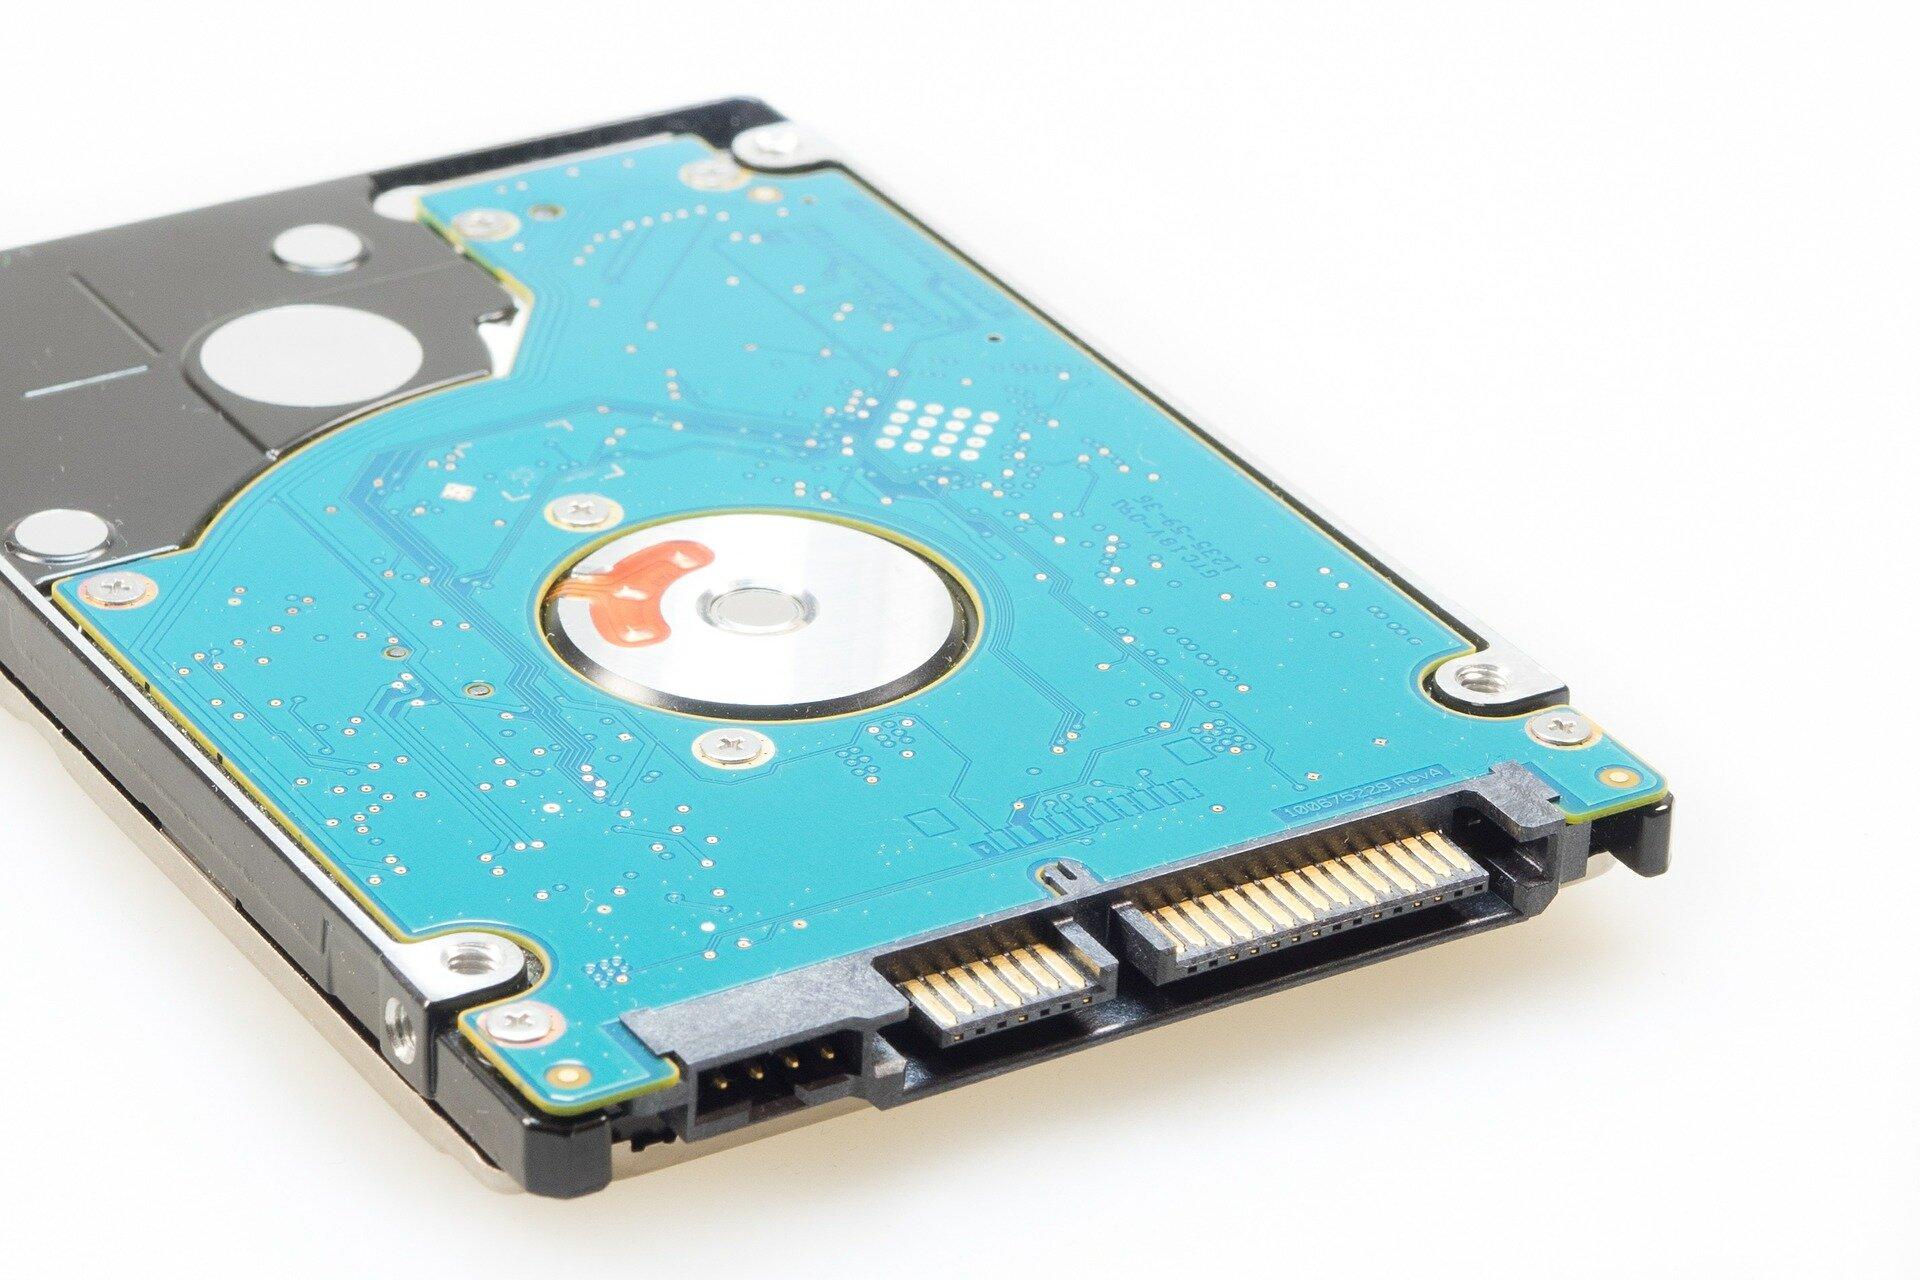 Upgrading hardware components like hard drives can help keep your computer running smoothly.